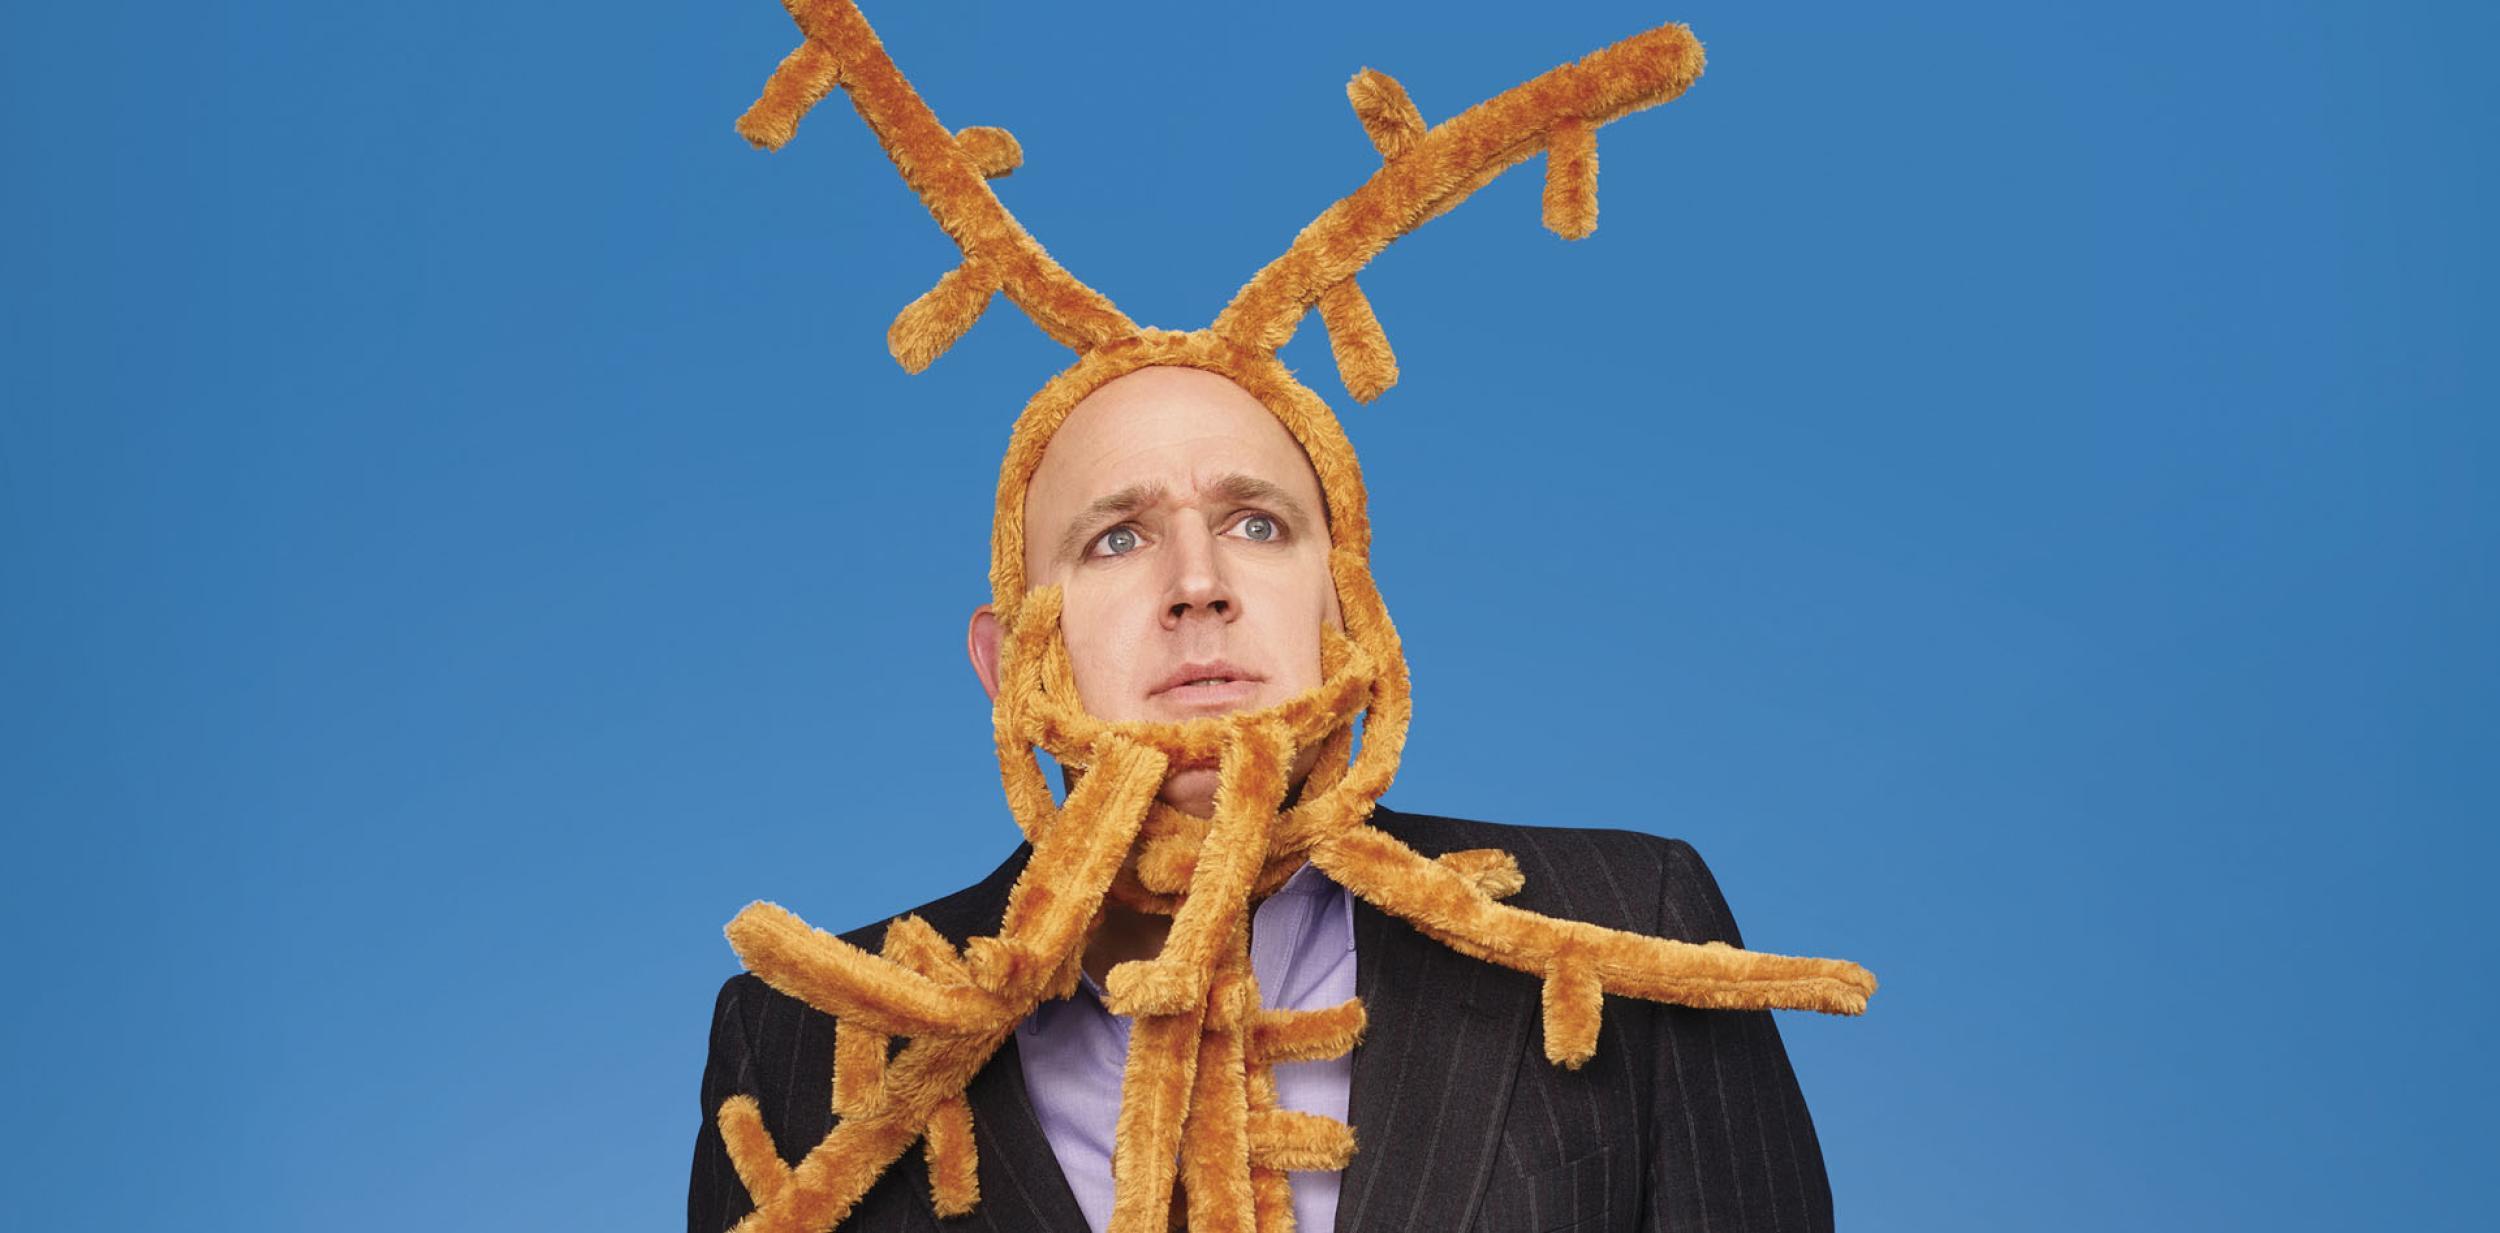 Tim Vine in suit with felt antlers on